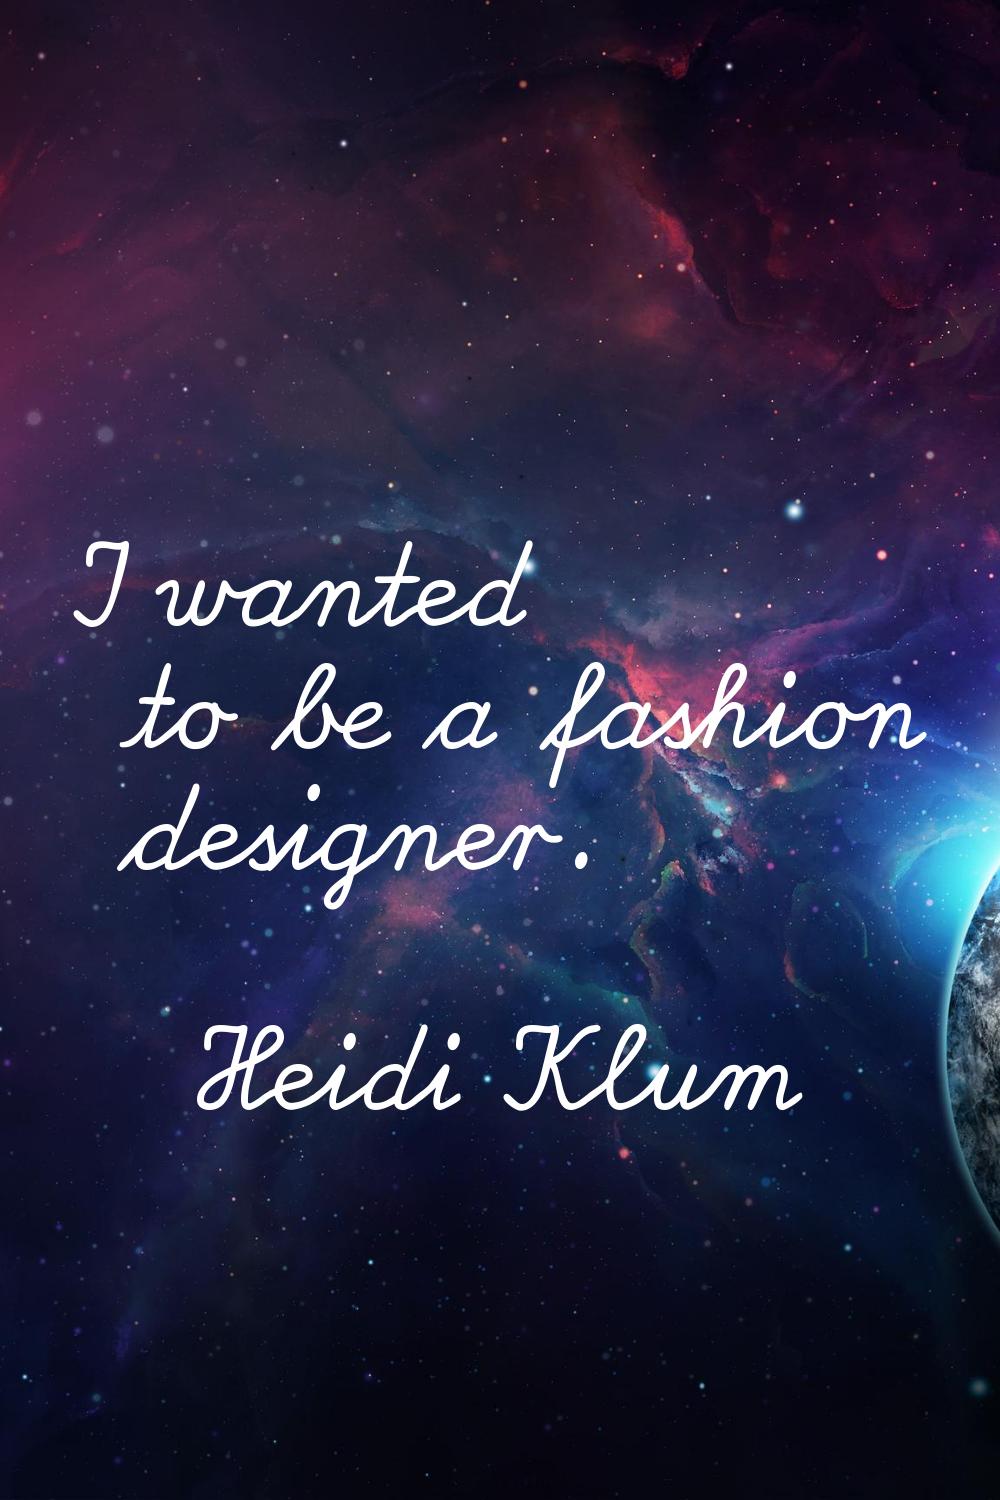 I wanted to be a fashion designer.